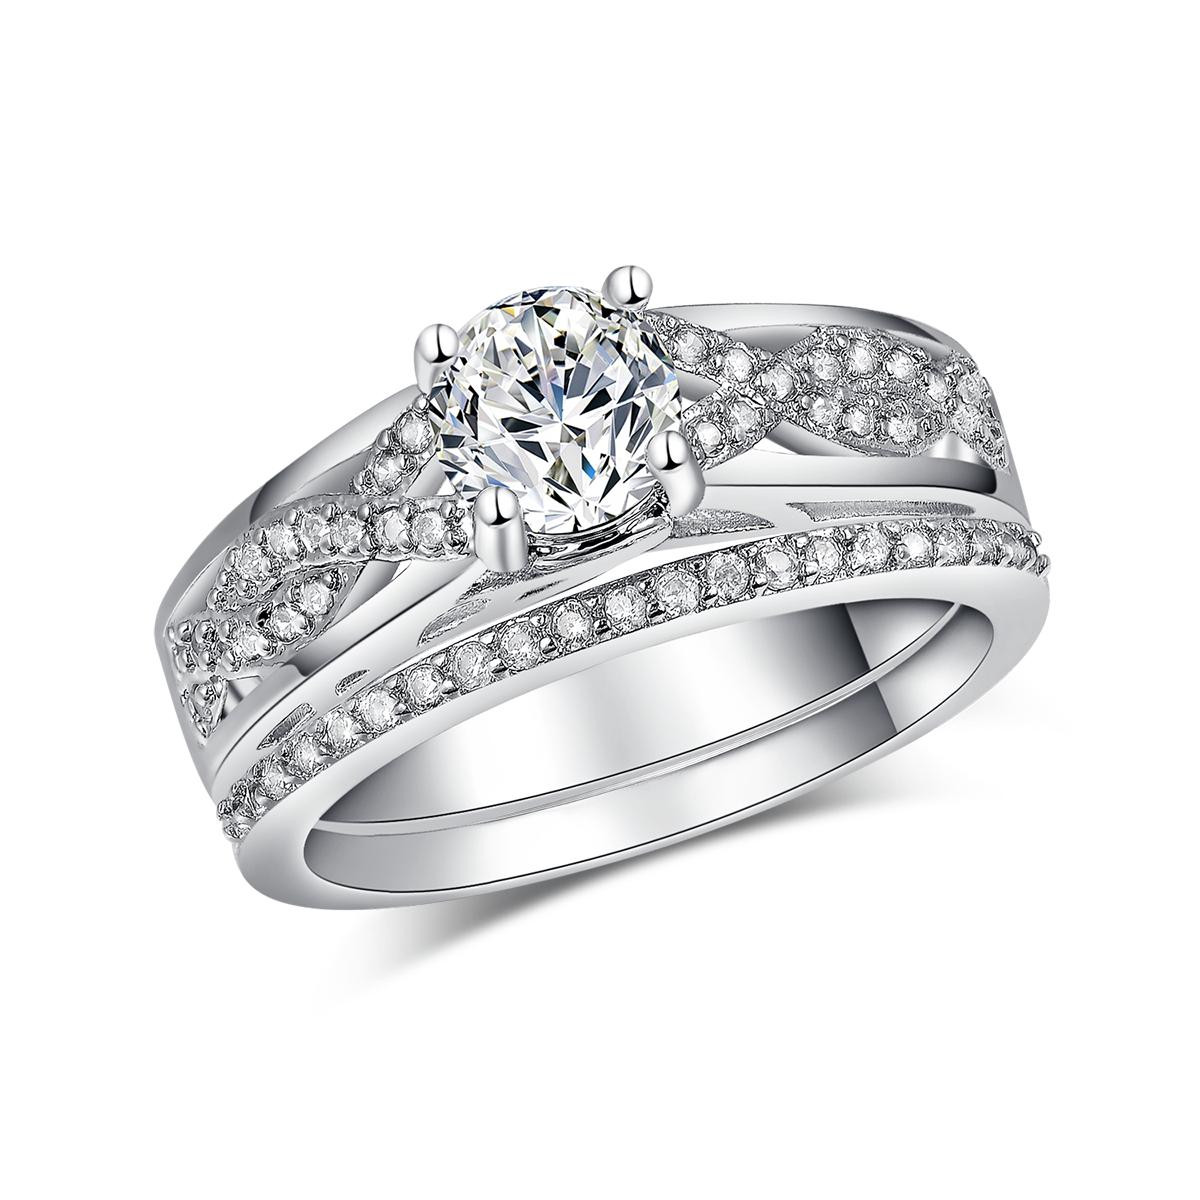 Cheap Wedding Ring Sets For Women
 Discount Wedding Ring Sets For Women White Gold Filled